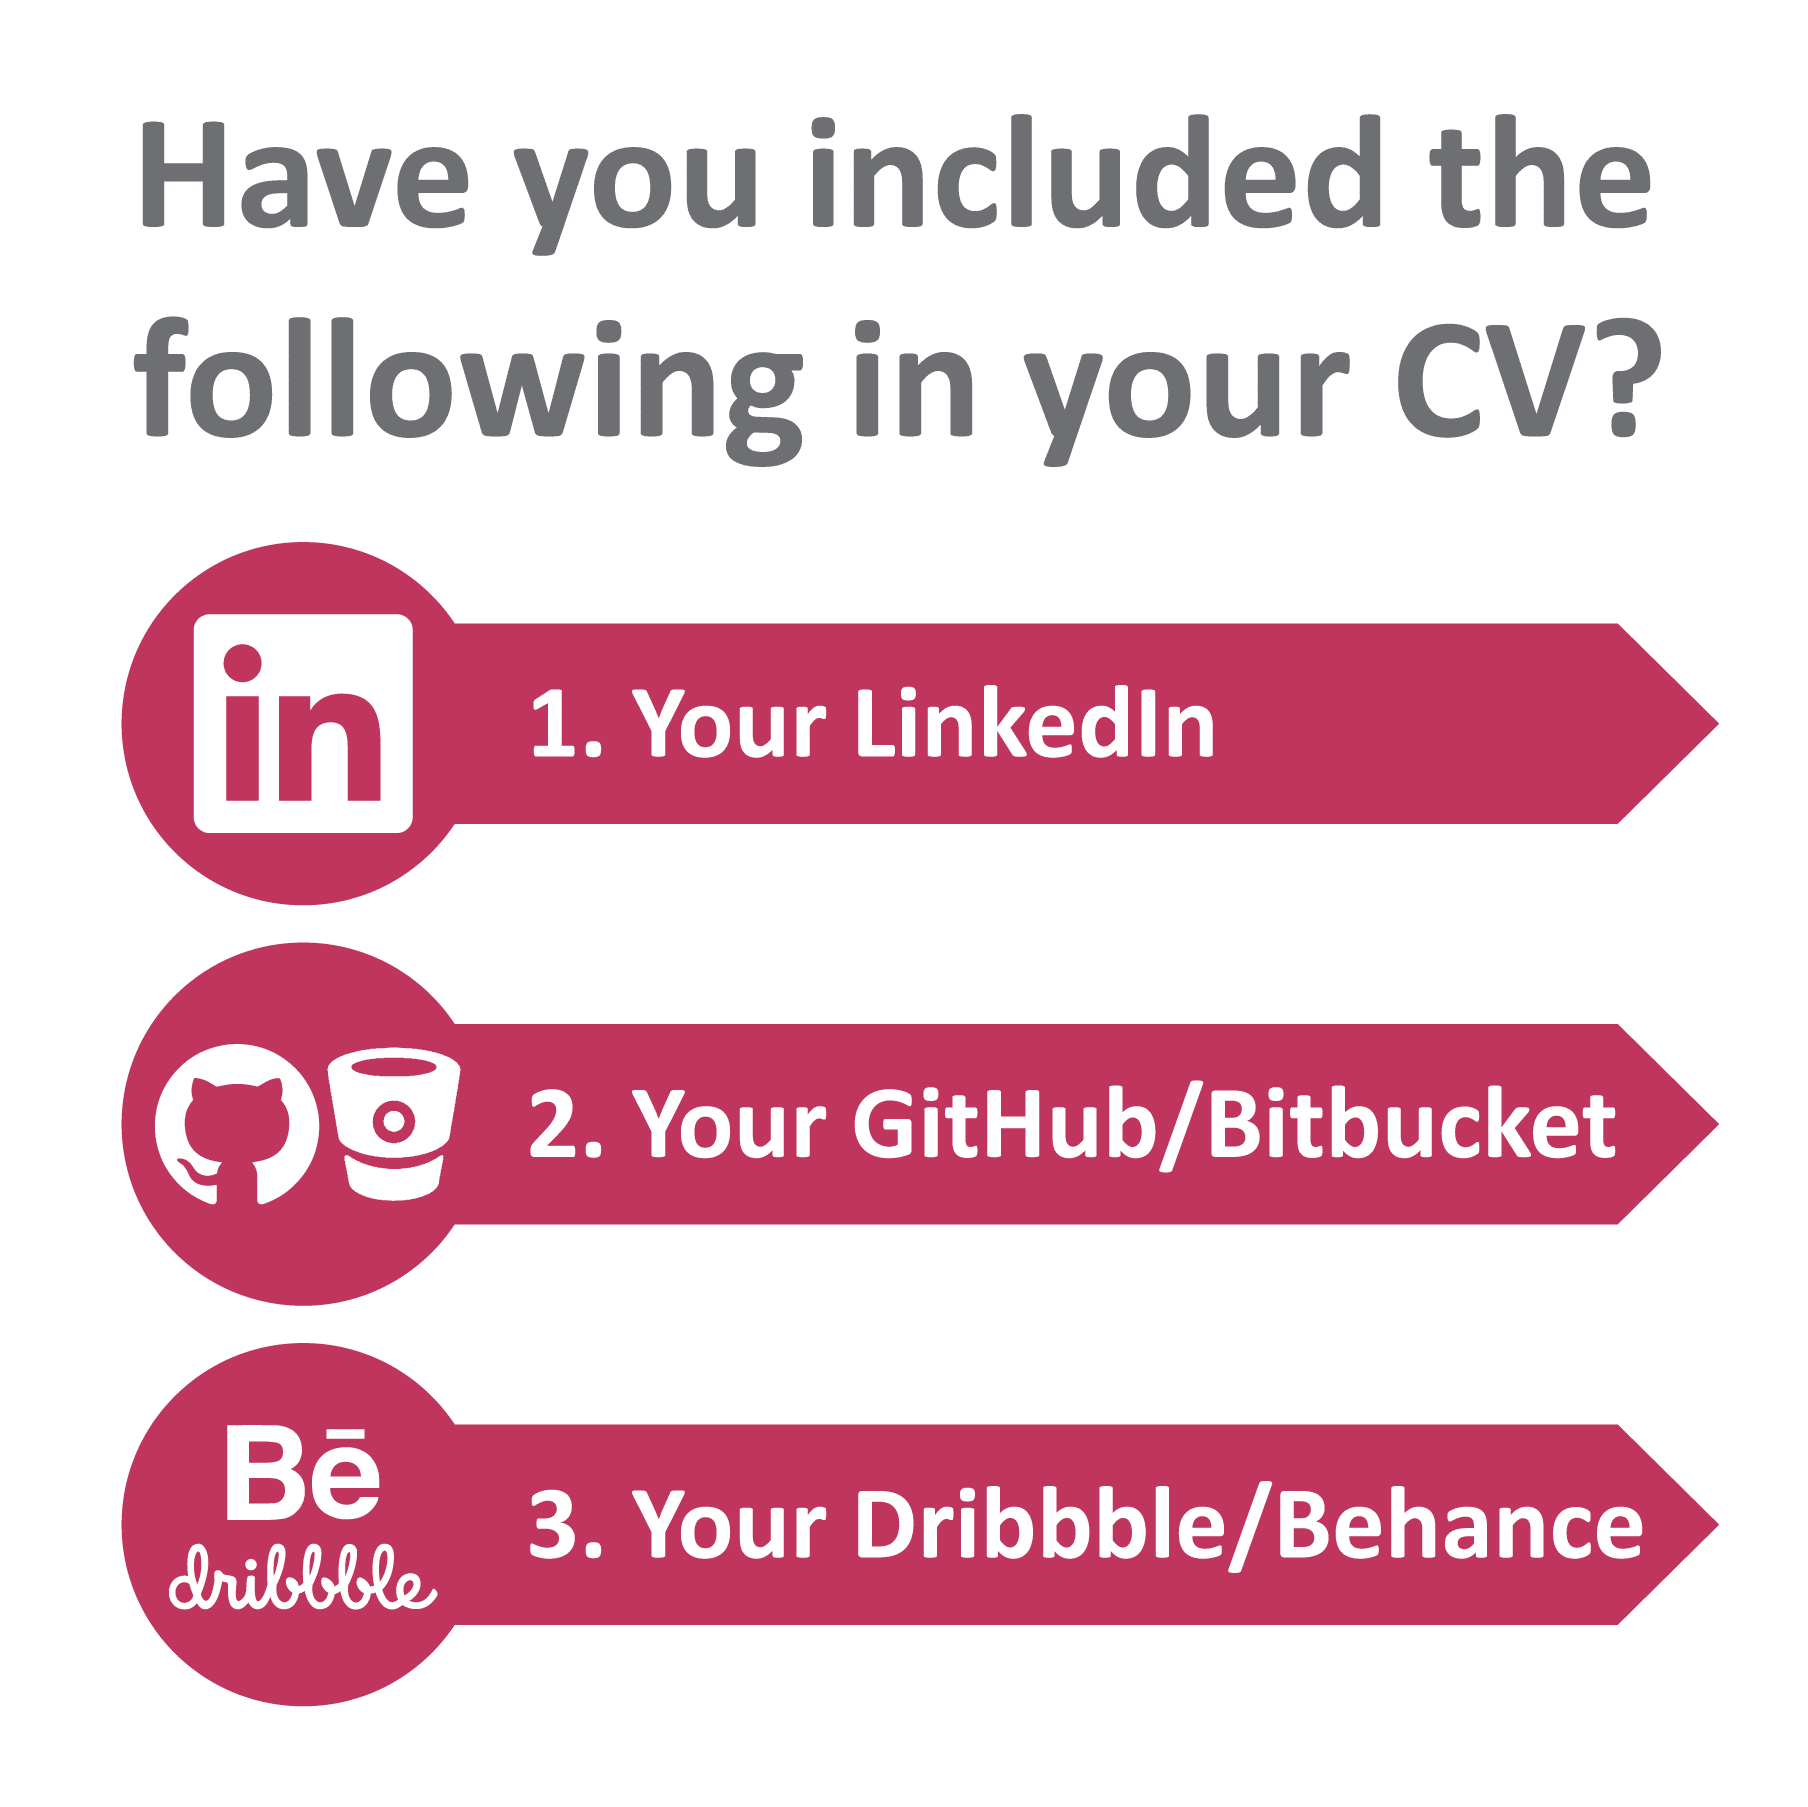 Do you have a great CV